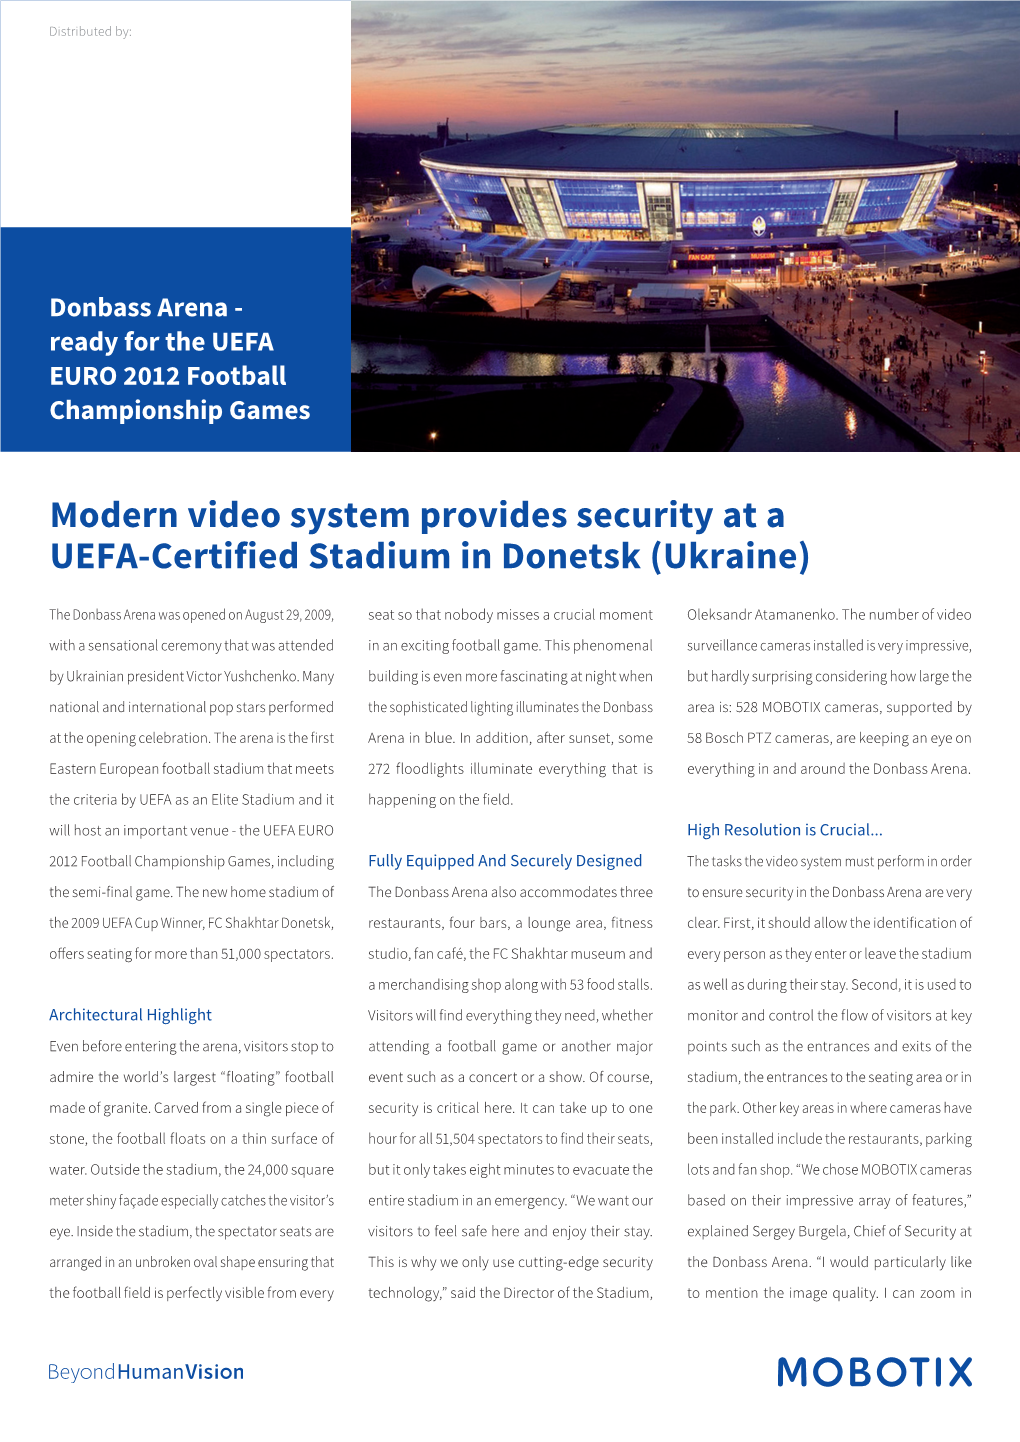 Donbass Arena - Ready for the UEFA EURO 2012 Football Championship Games